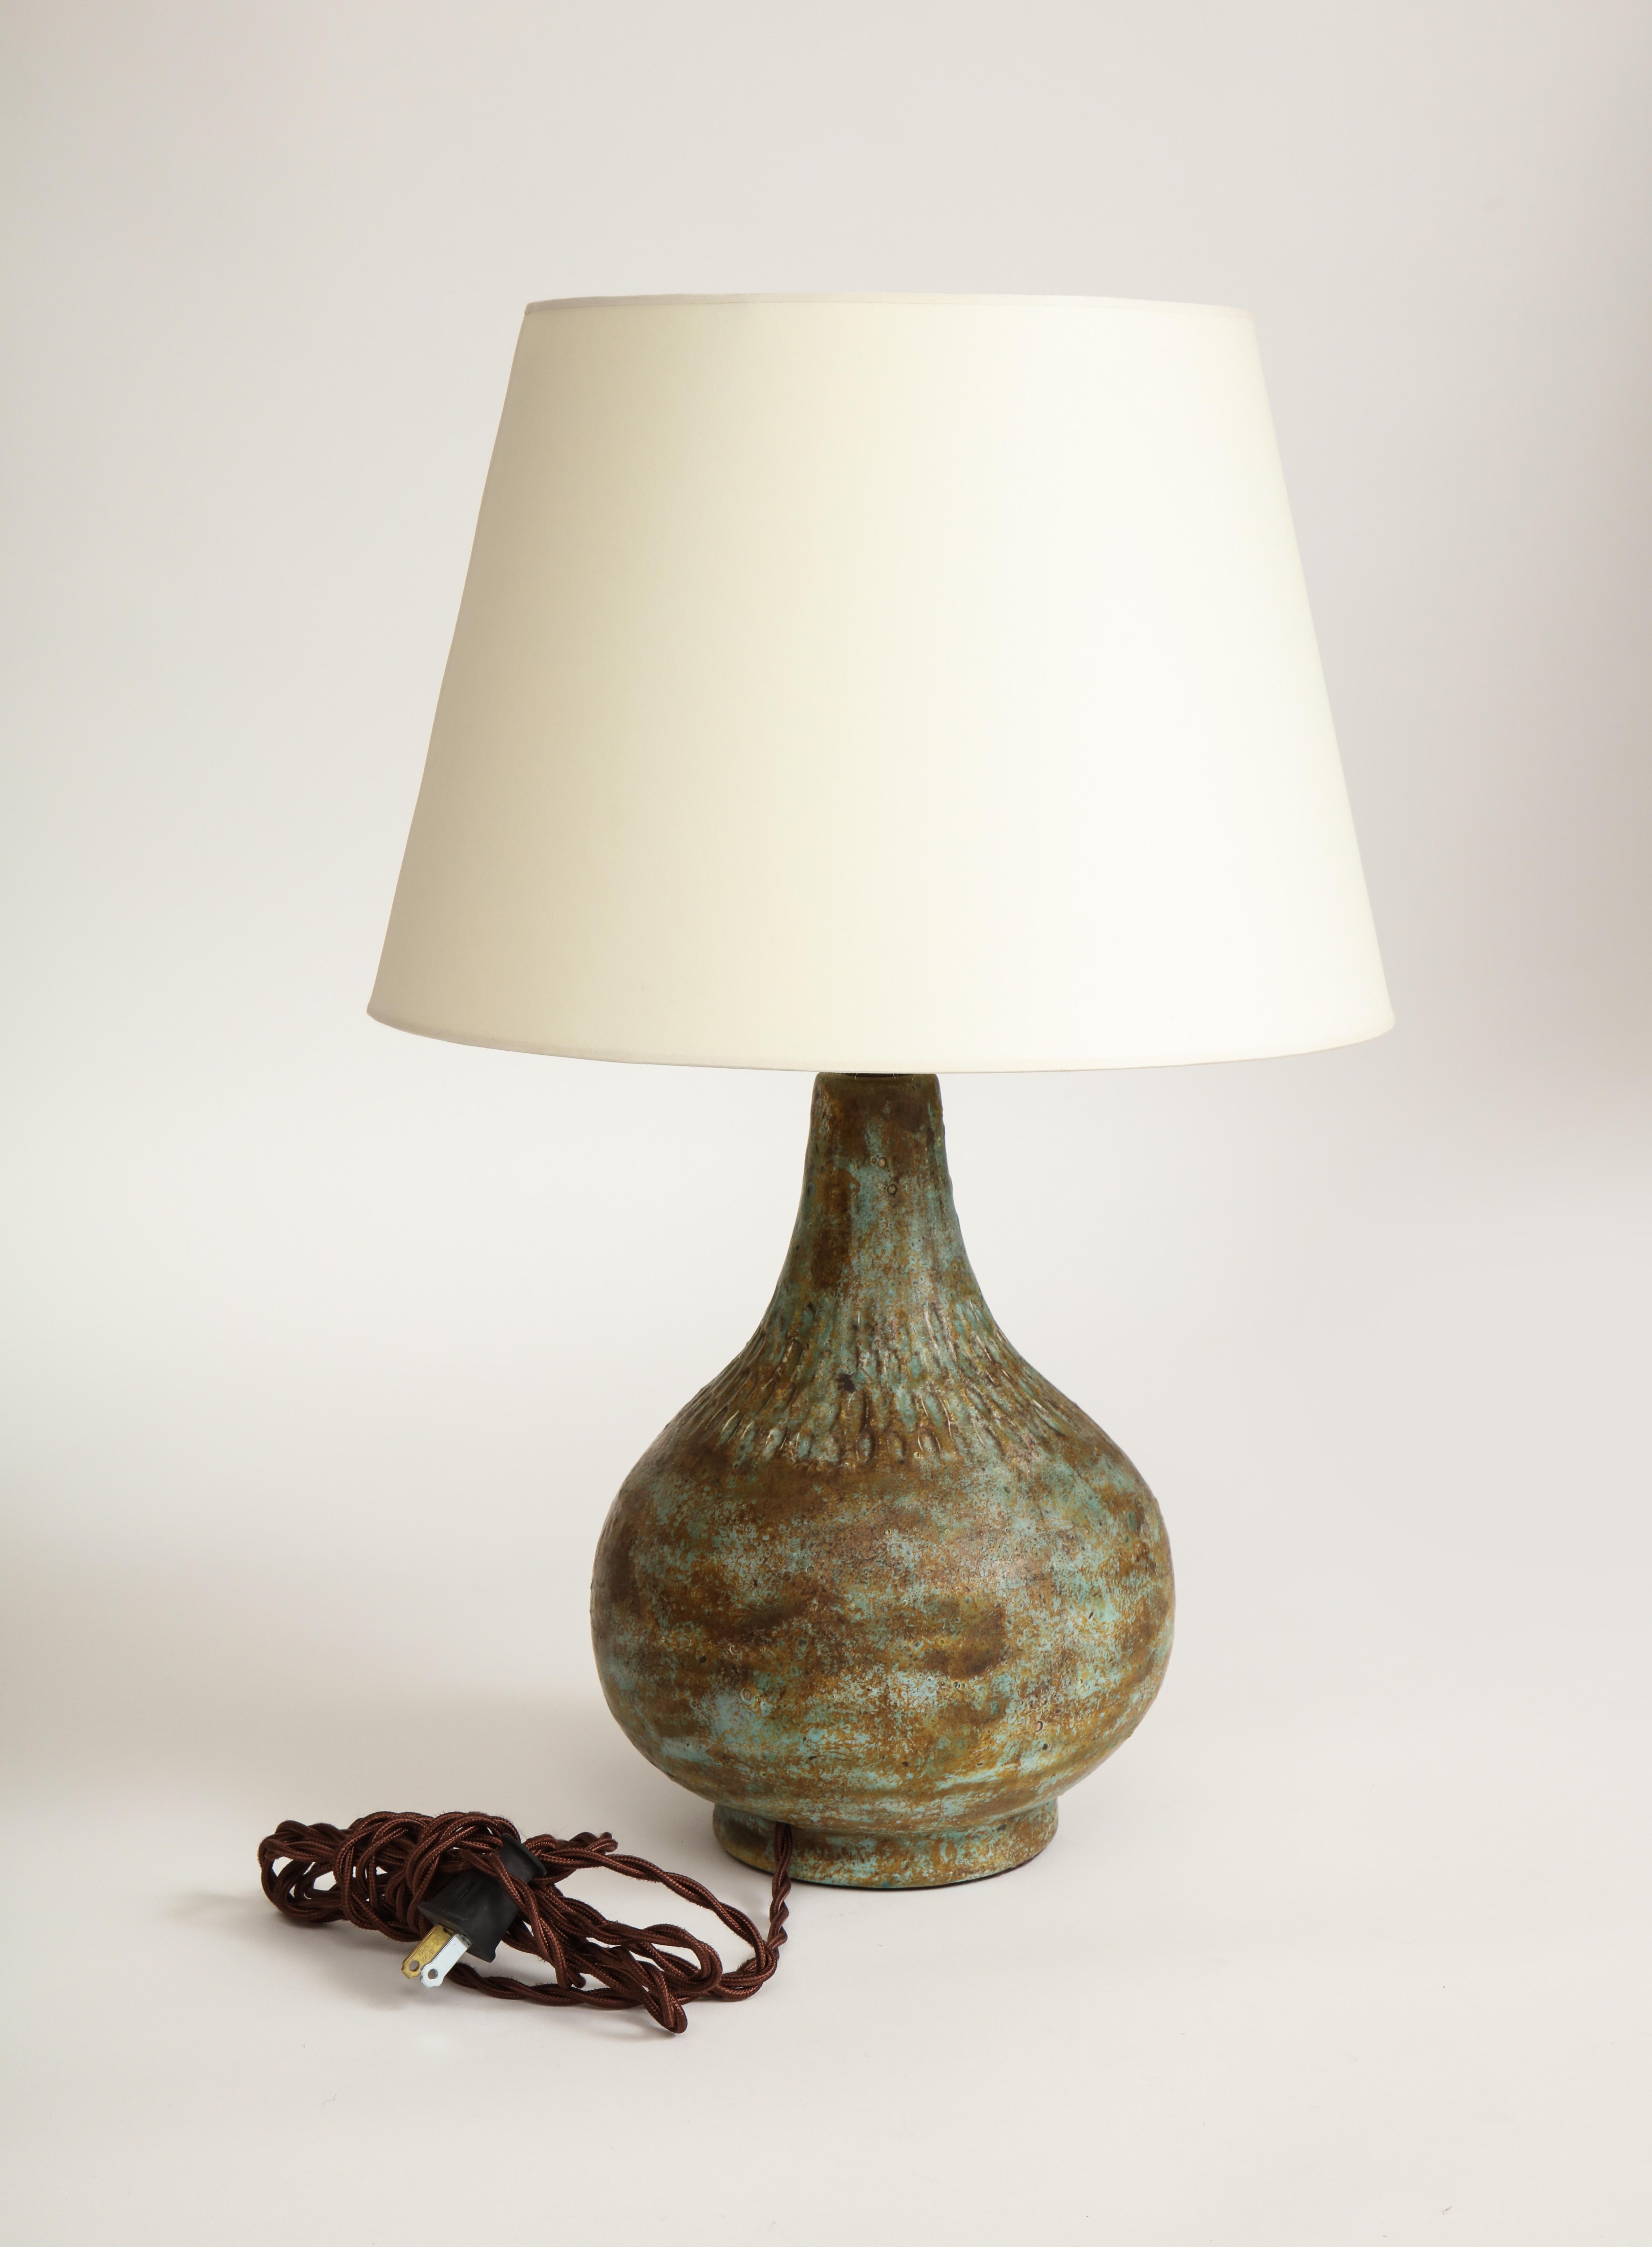 Vintage ceramic lamp with unique coloring and texture. 

Wired to US standards. Shade not included.